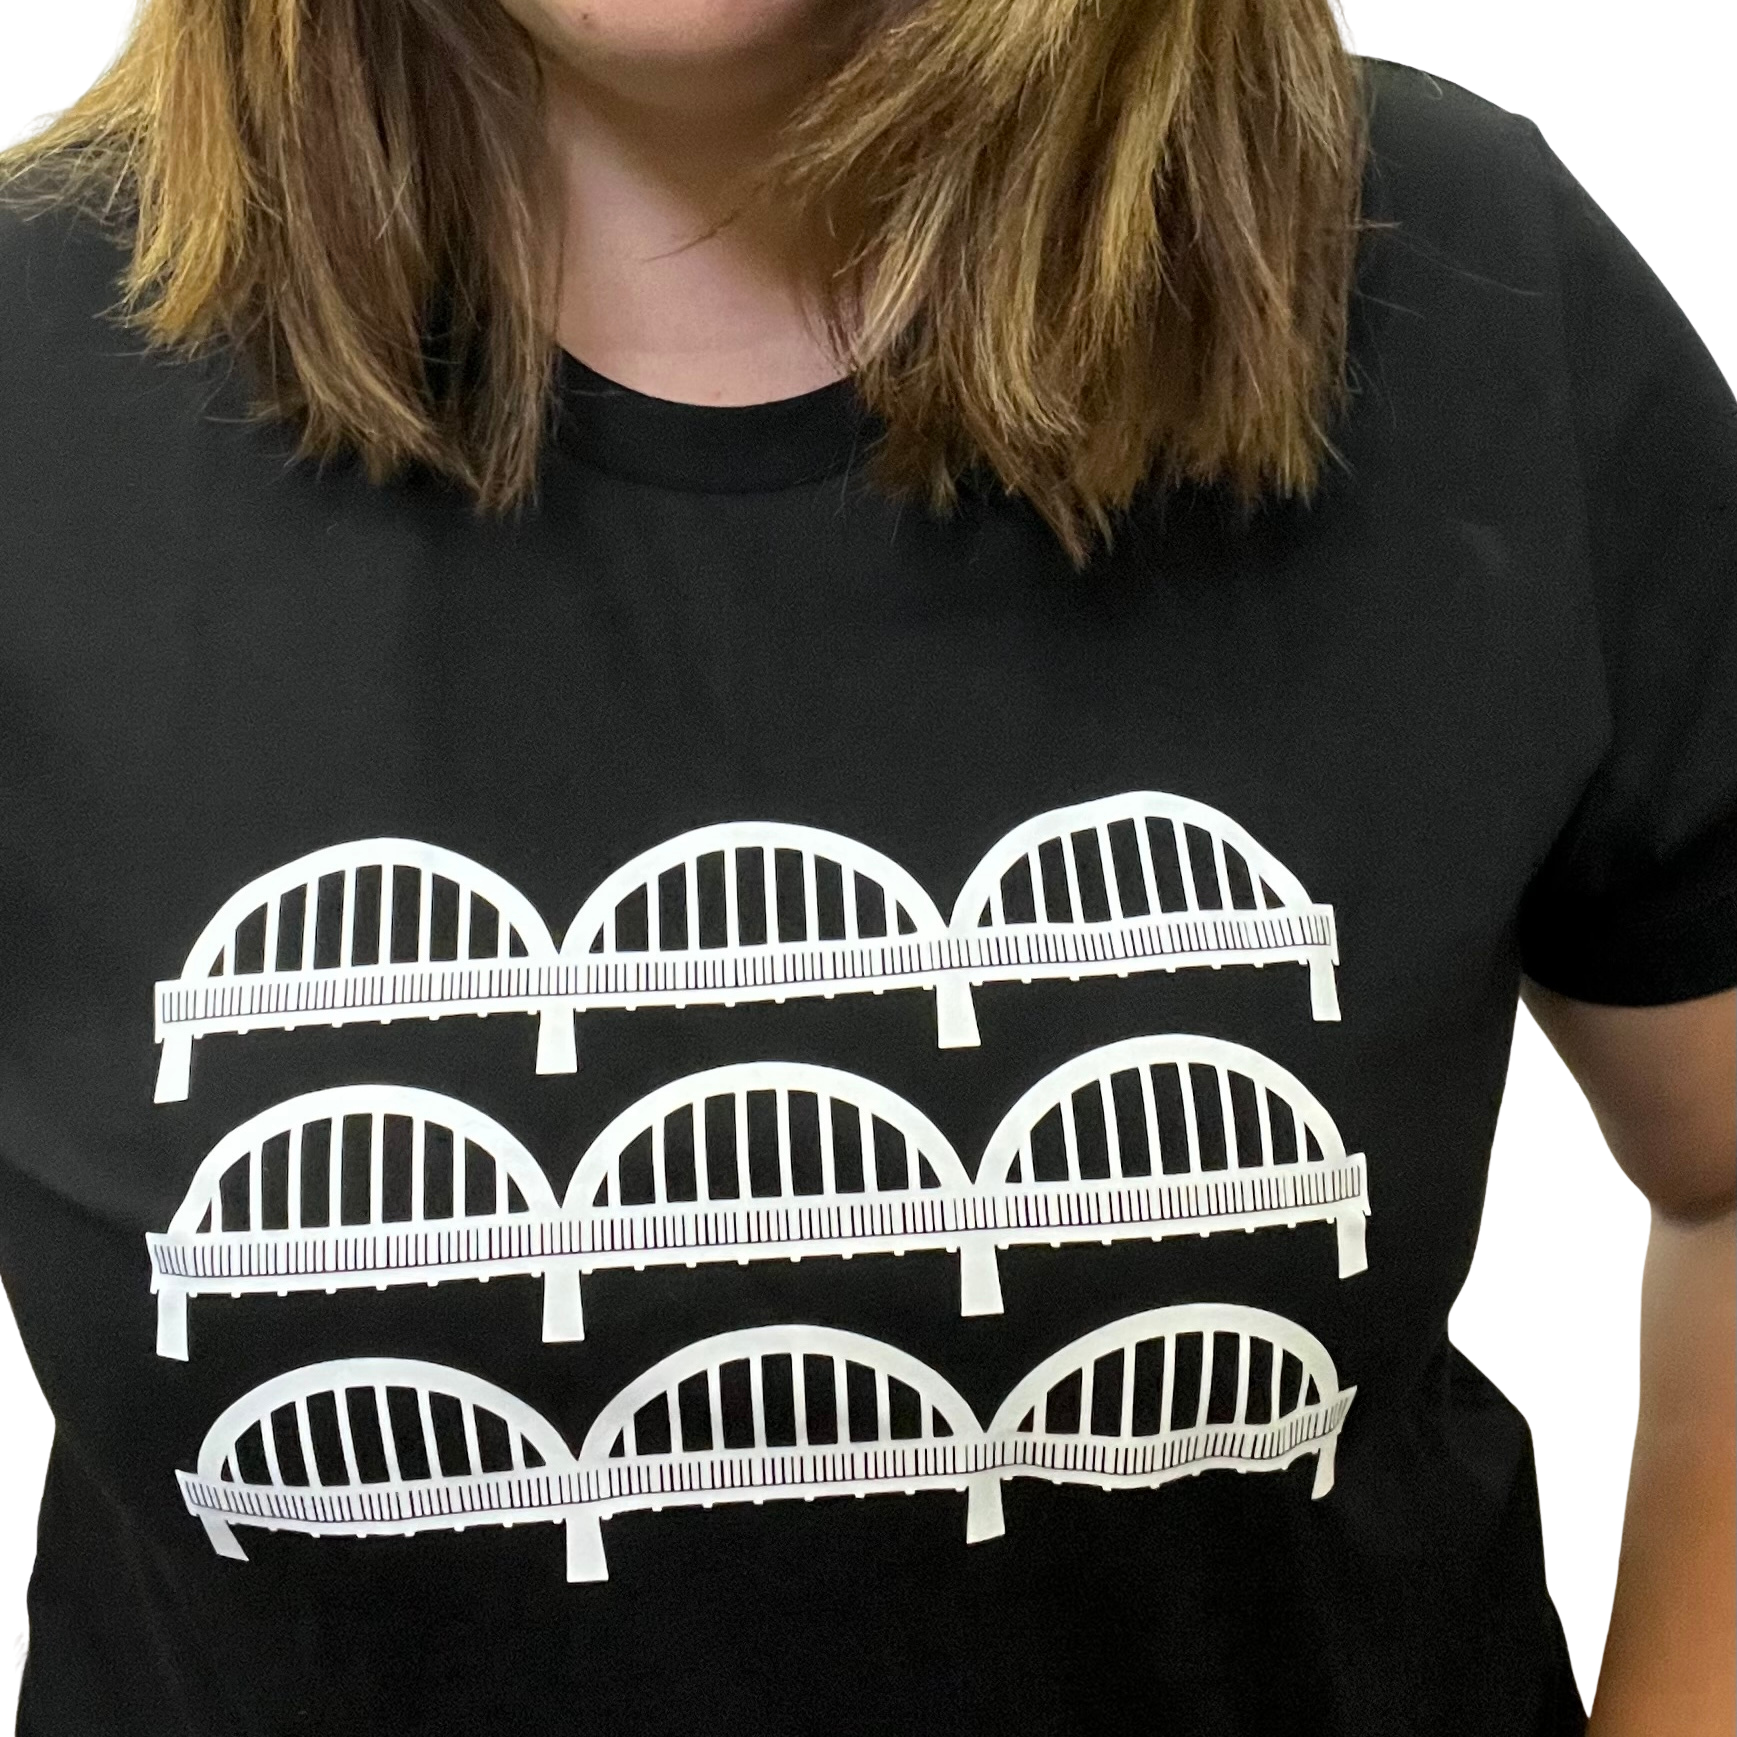 JustOne's black t-shirt with the caledonia bridge in white. The bridge is shown in three rows making a total of nine arches